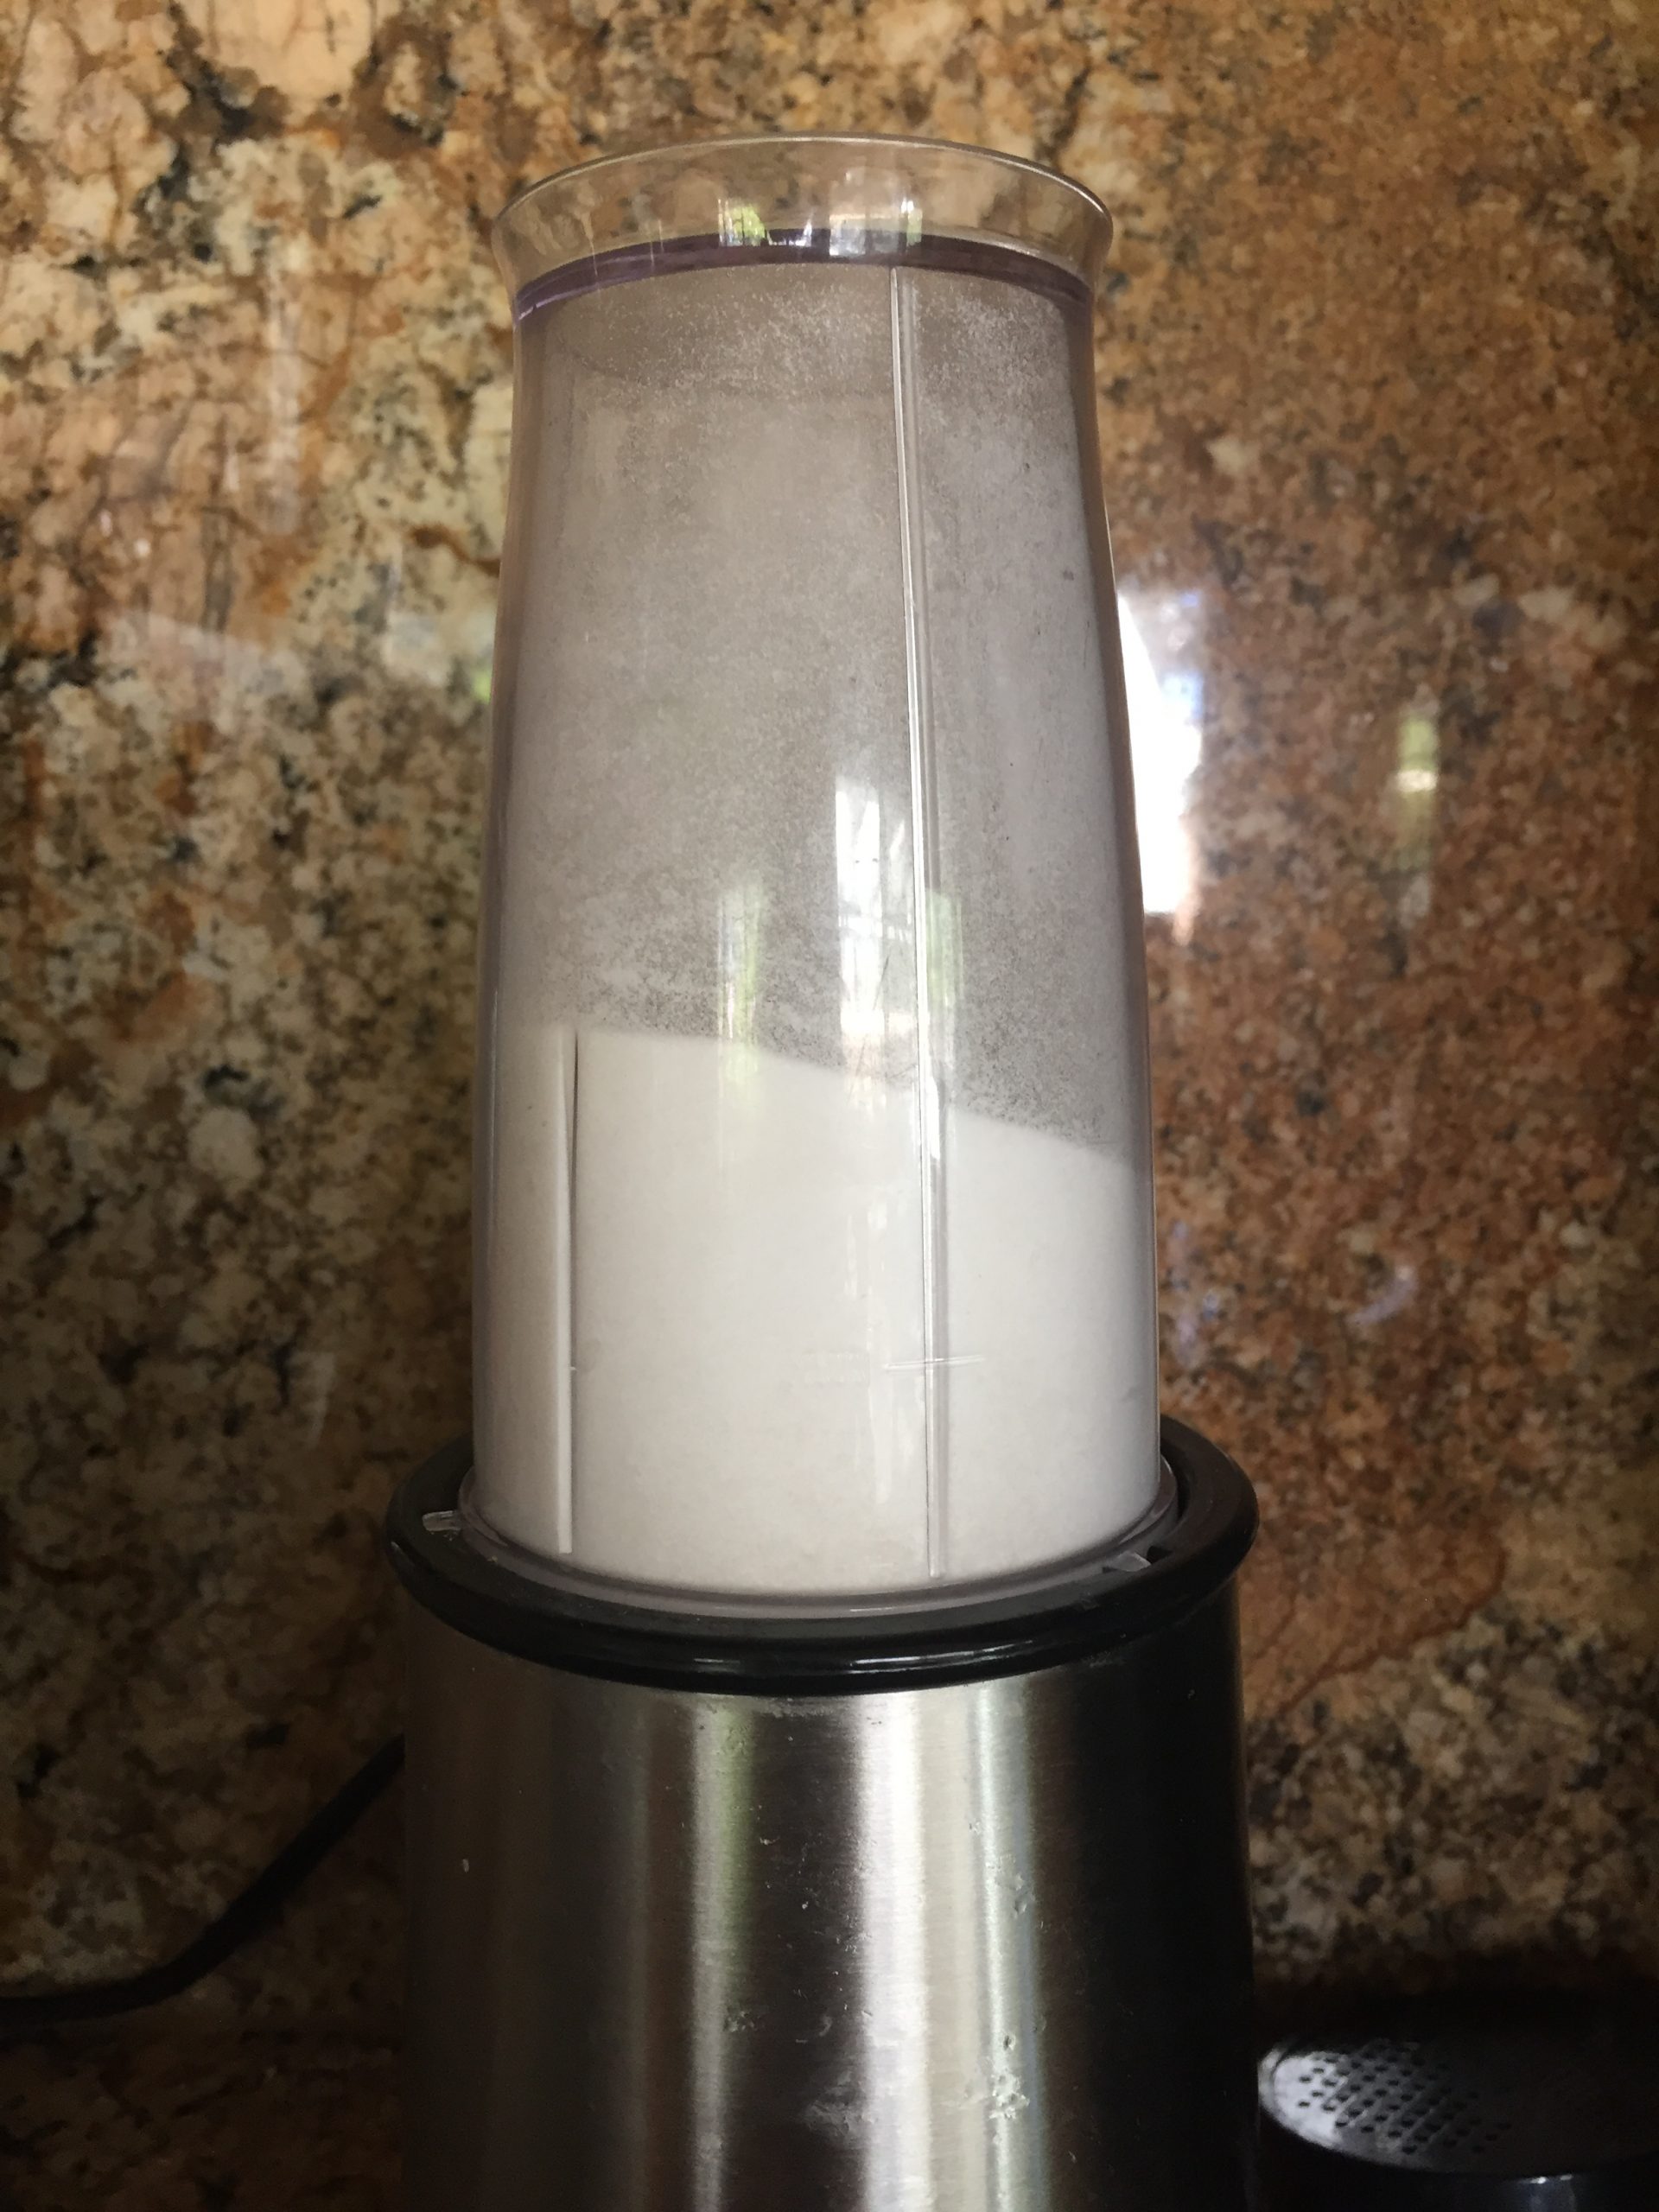 Make sugar fine by blending it with a blender.  Be careful not to make it a fine powder.